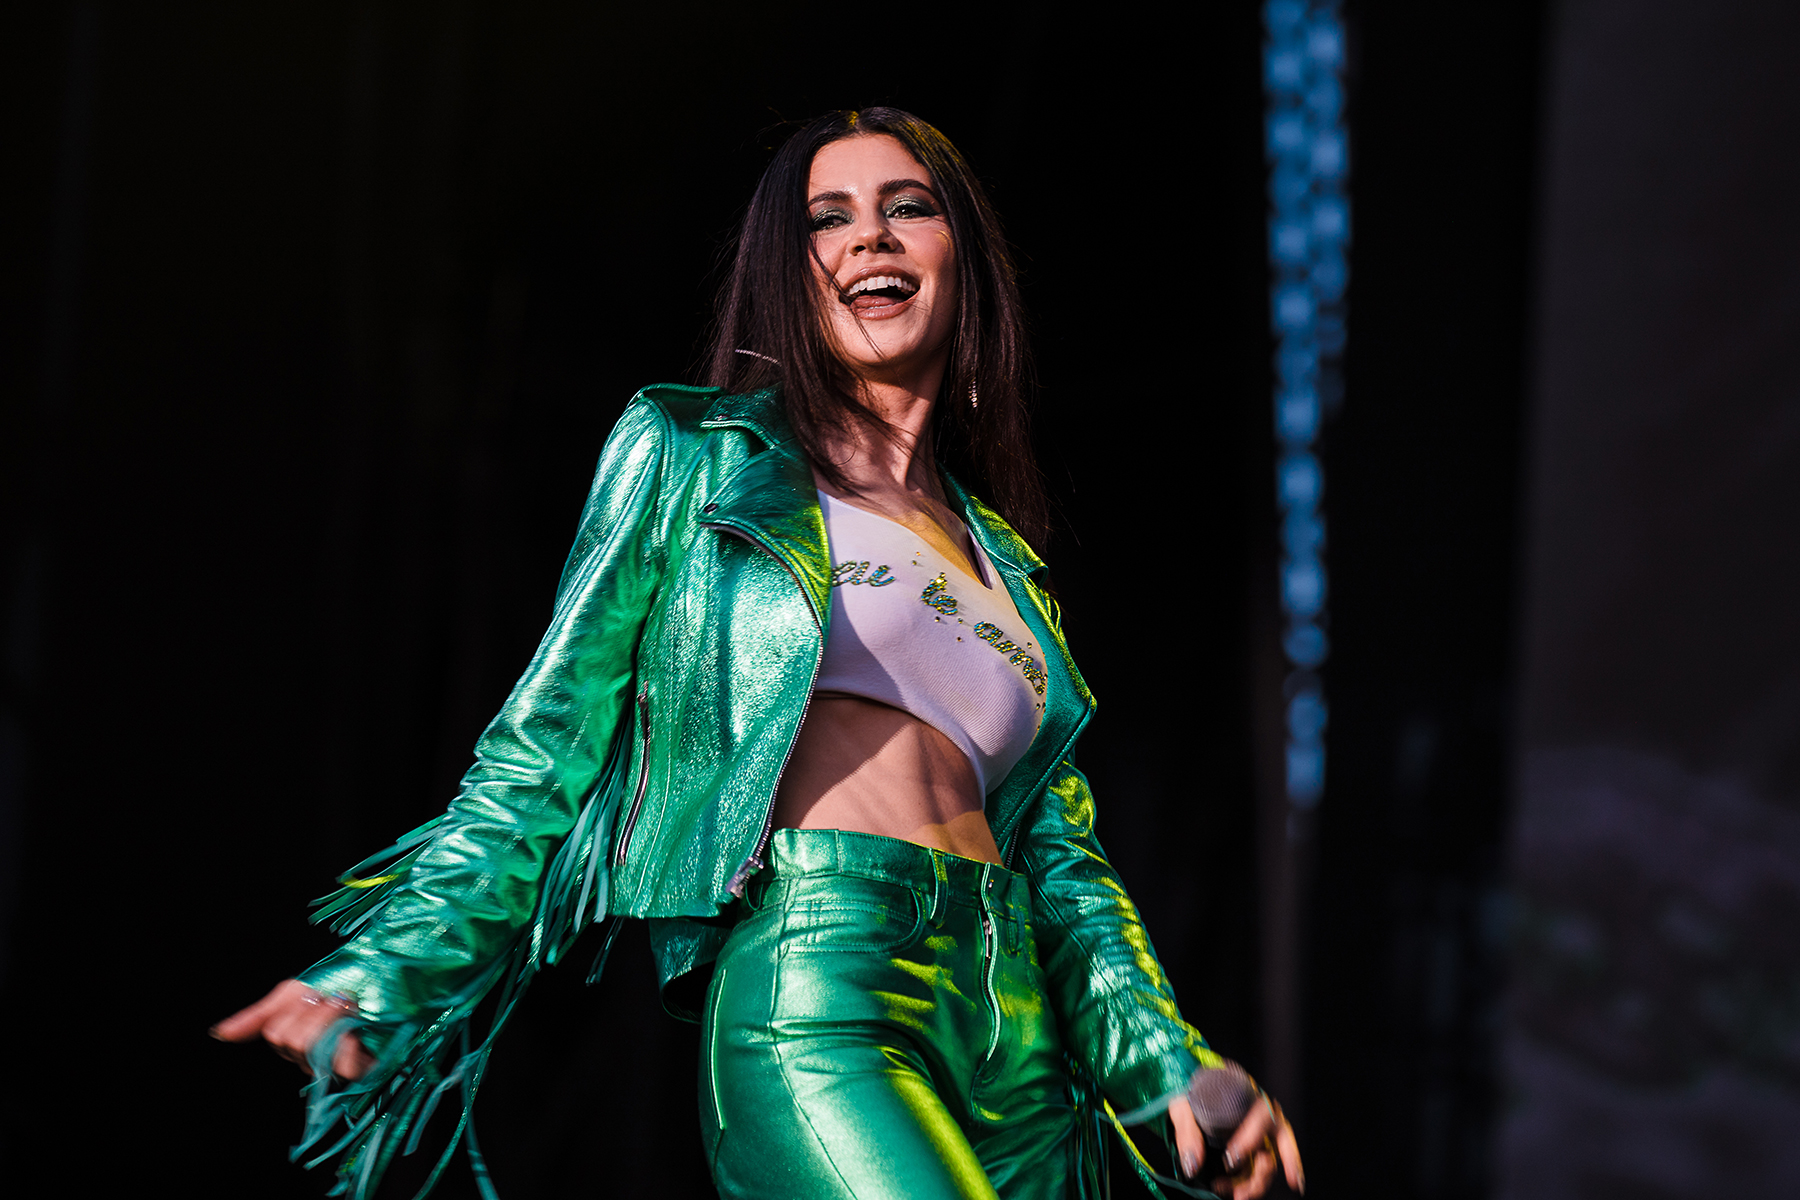 After Lollapalooza in Brazil, Marina and Other Artists Slam Censorship